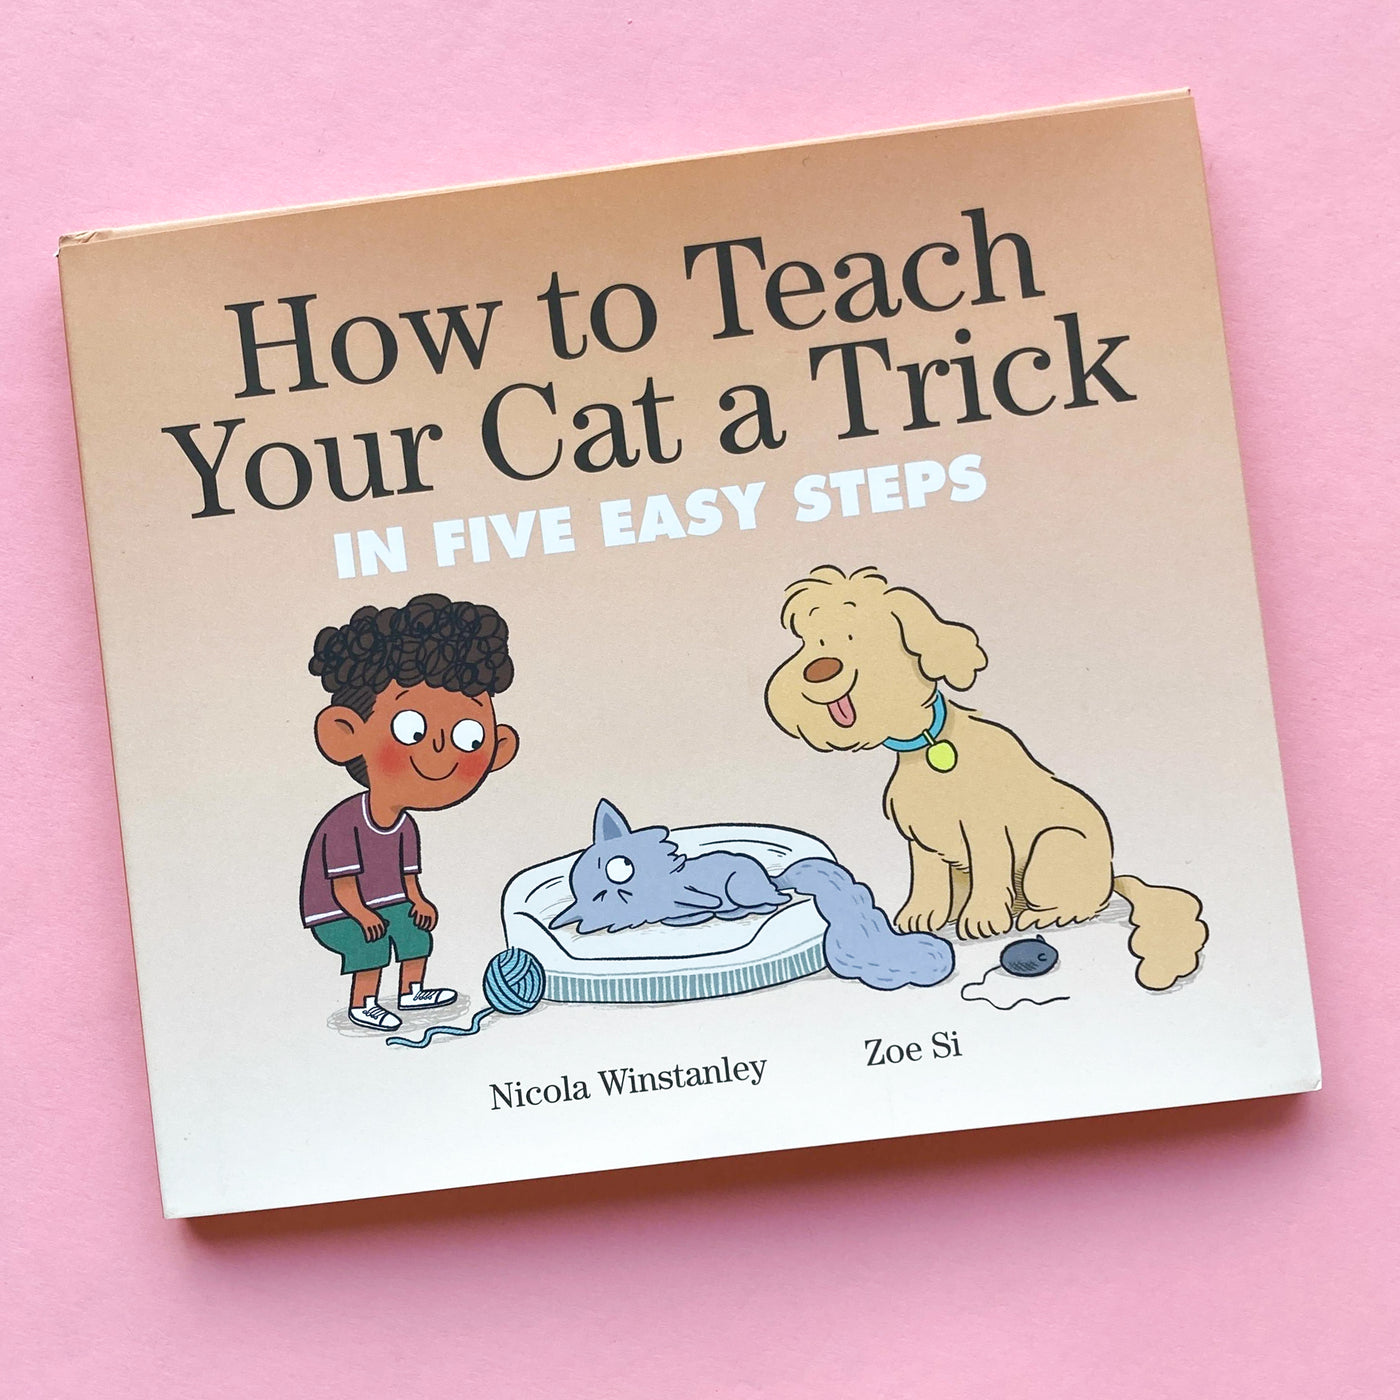 How to Teach Your Cat a Trick: in Five Easy Steps by Nicola Winstanley and Zoe Si